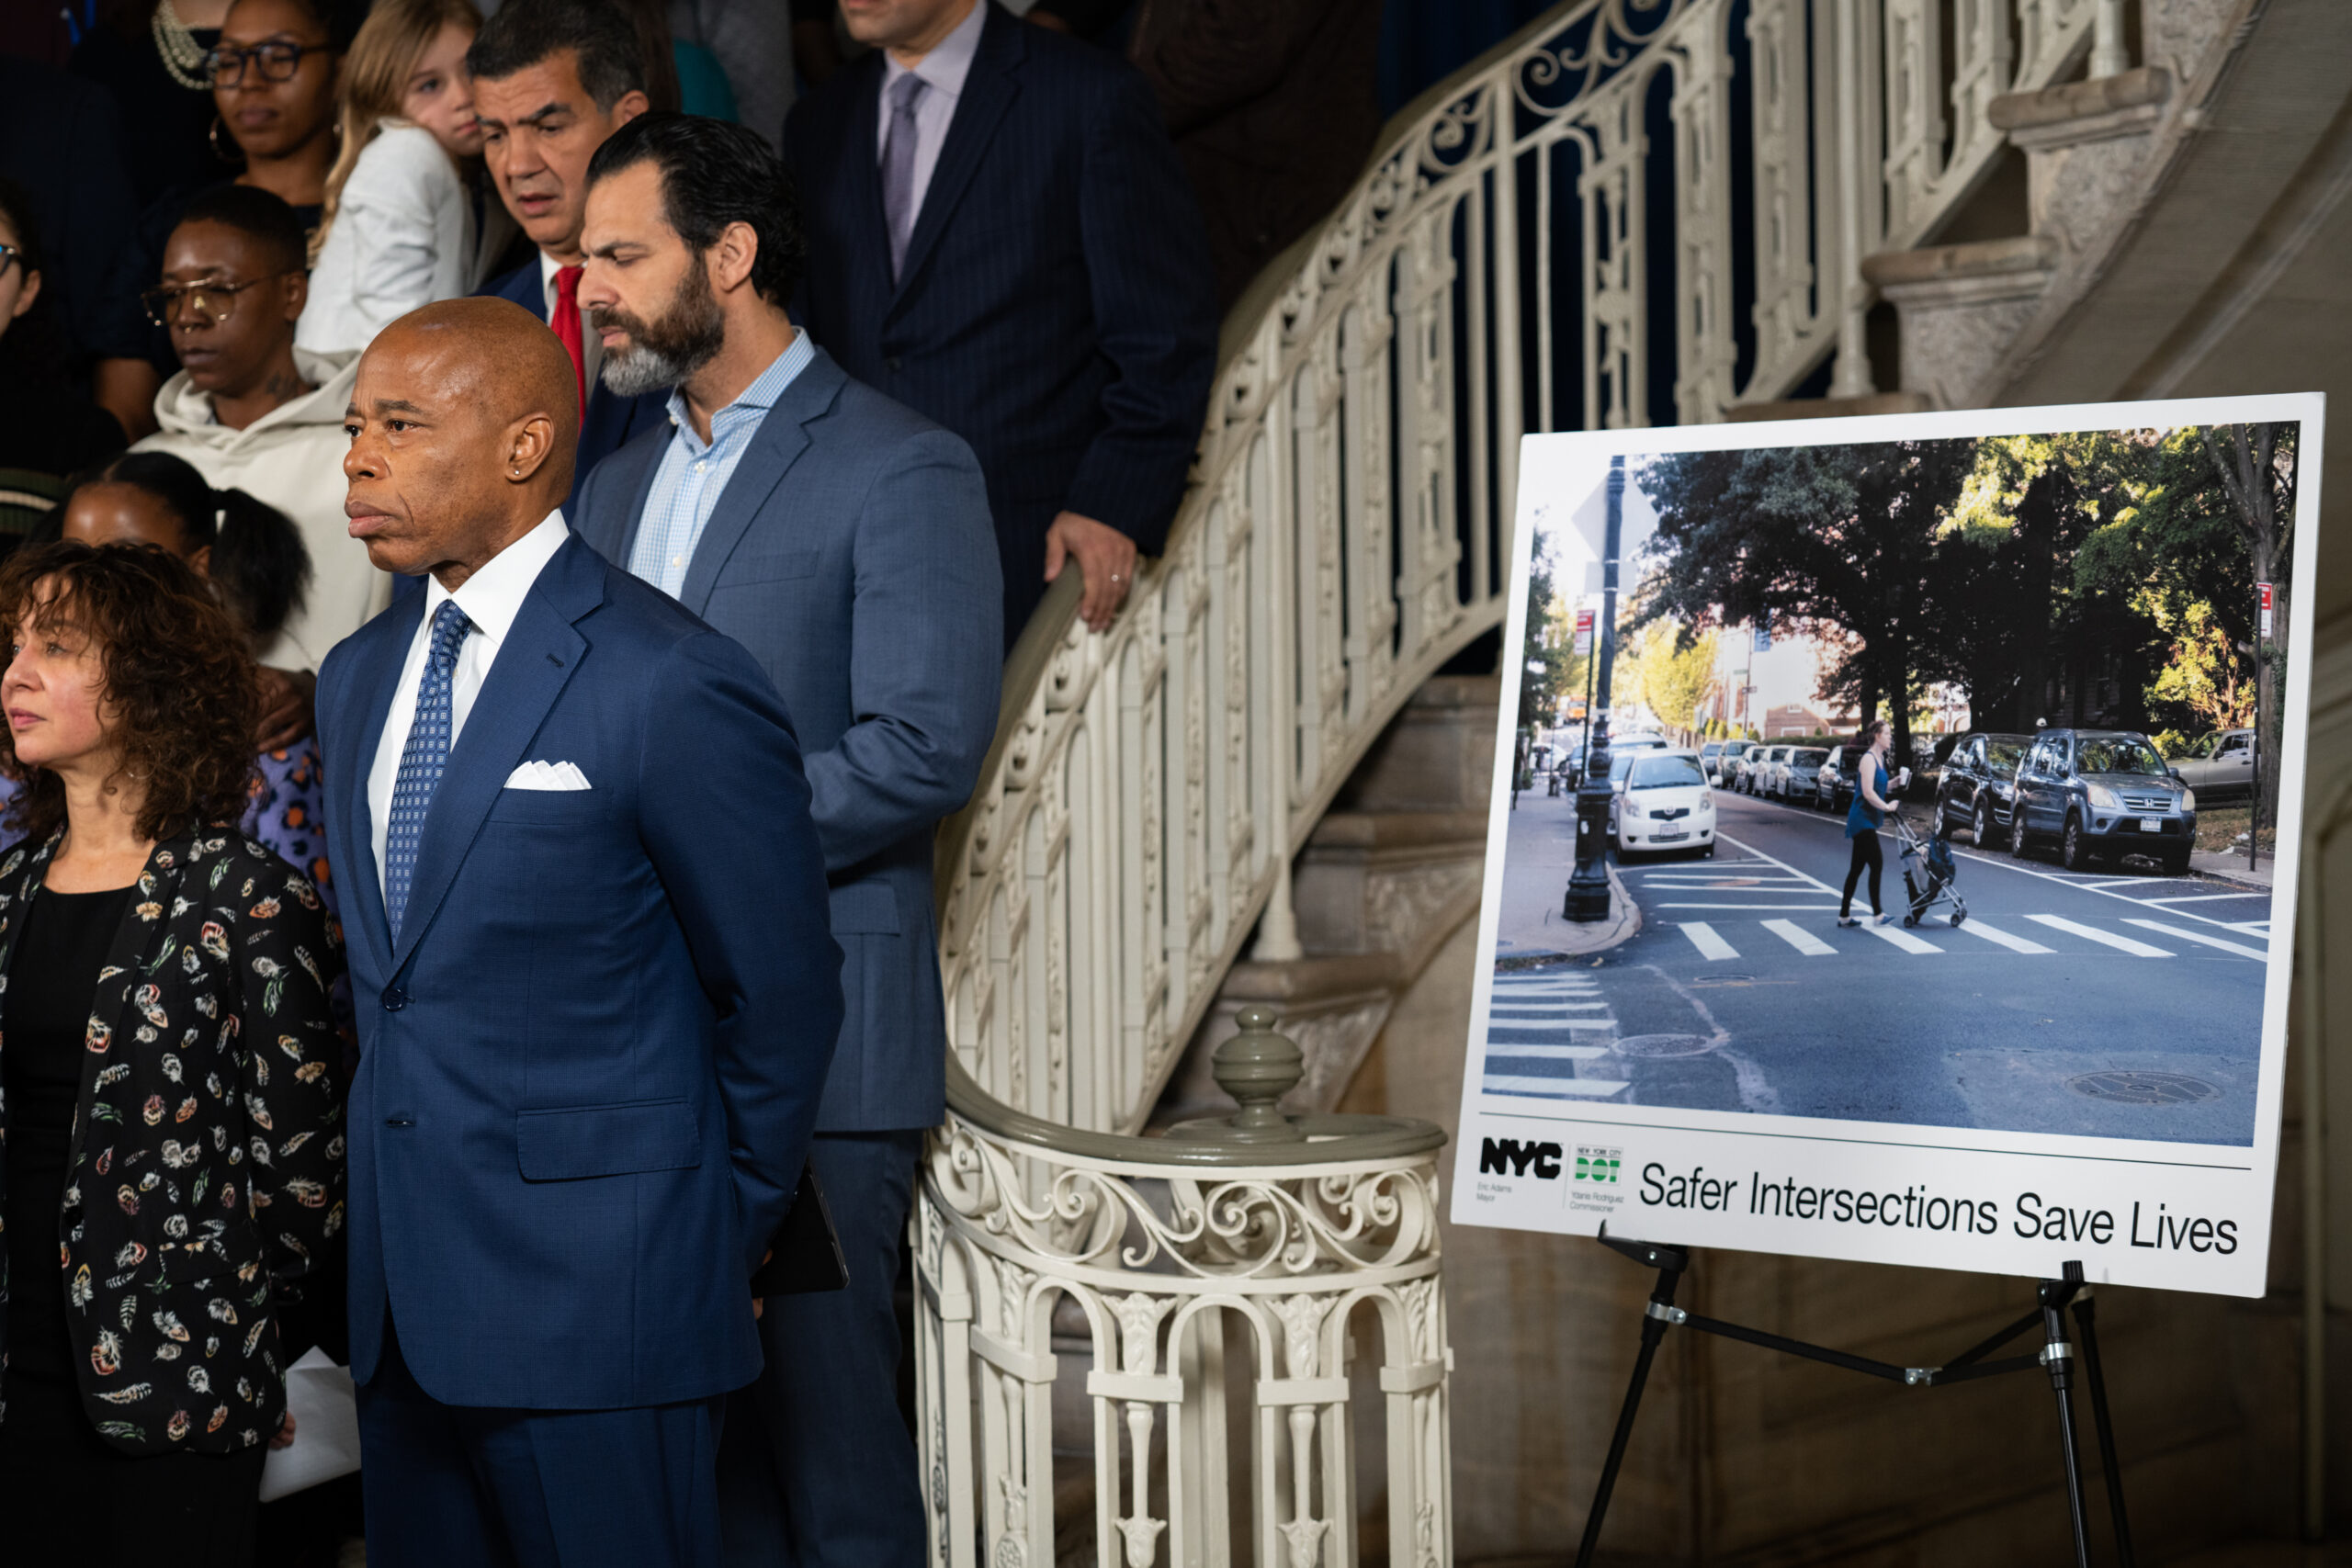 work-announced-at-2,000-intersections-in-new-york-every-year-to-prevent-deaths-and-vehicle-accidents